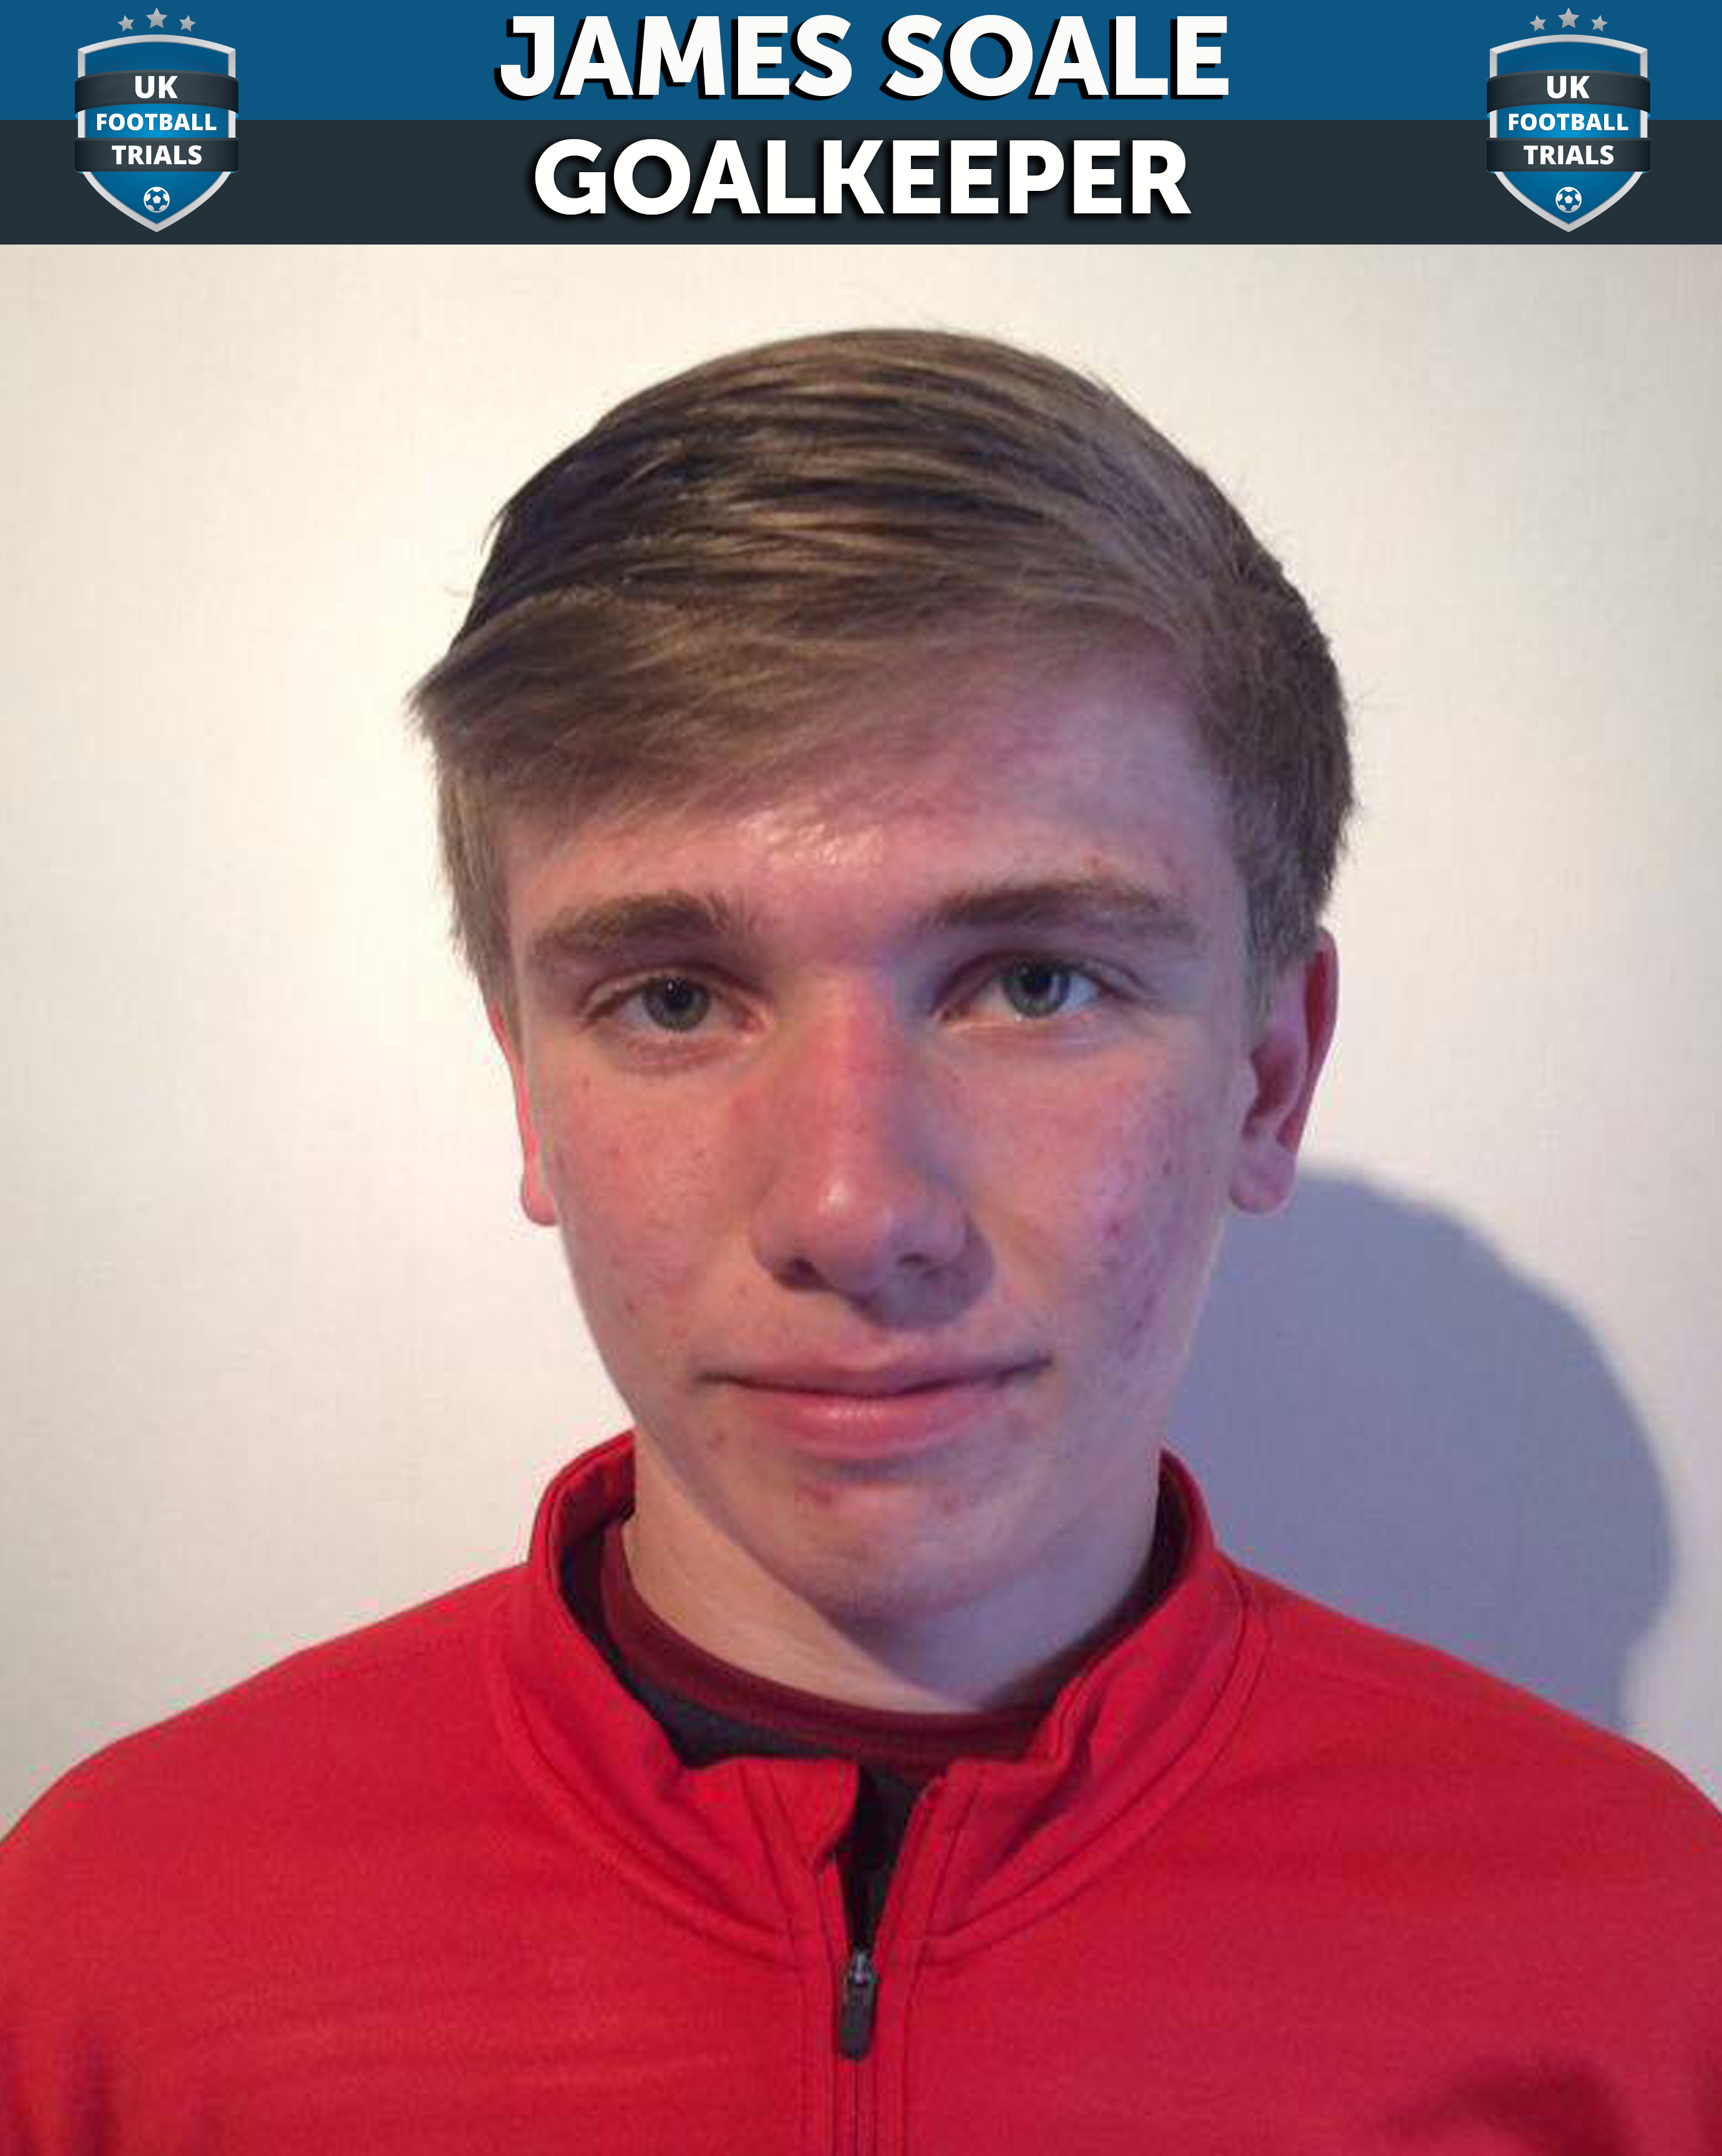 James Soale - Aged 16 - Signed with Semi-Pro Club